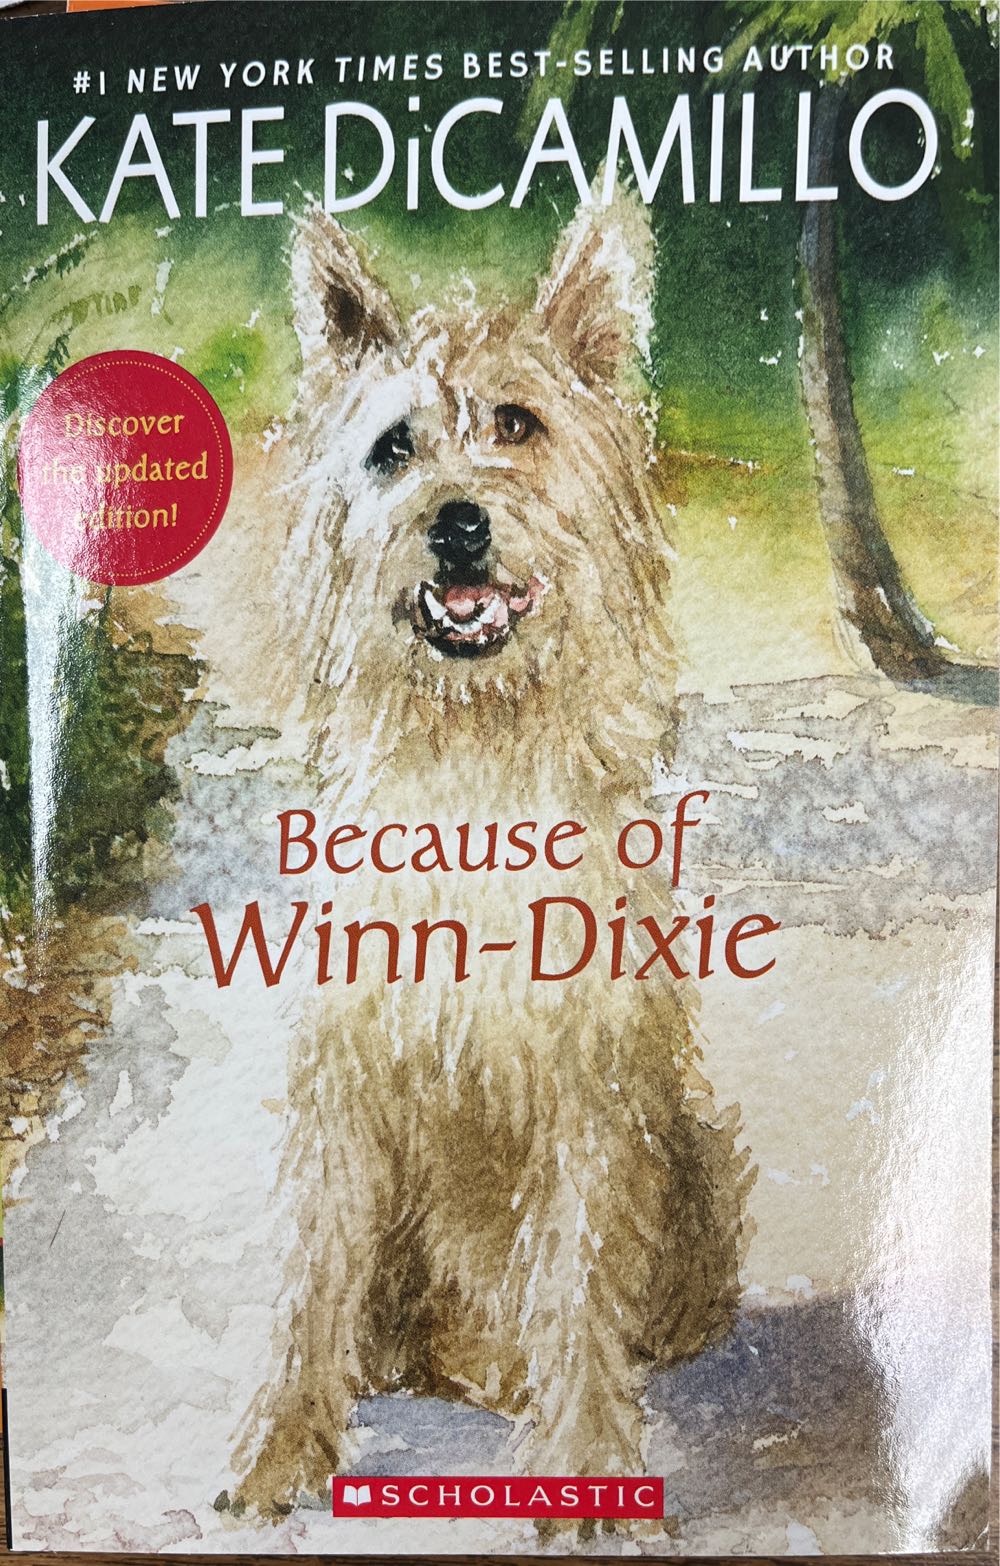 Because of Winn-Dixie - Kate Dicamillo (Scholastic - Paperback) book collectible [Barcode 9781338759105] - Main Image 1